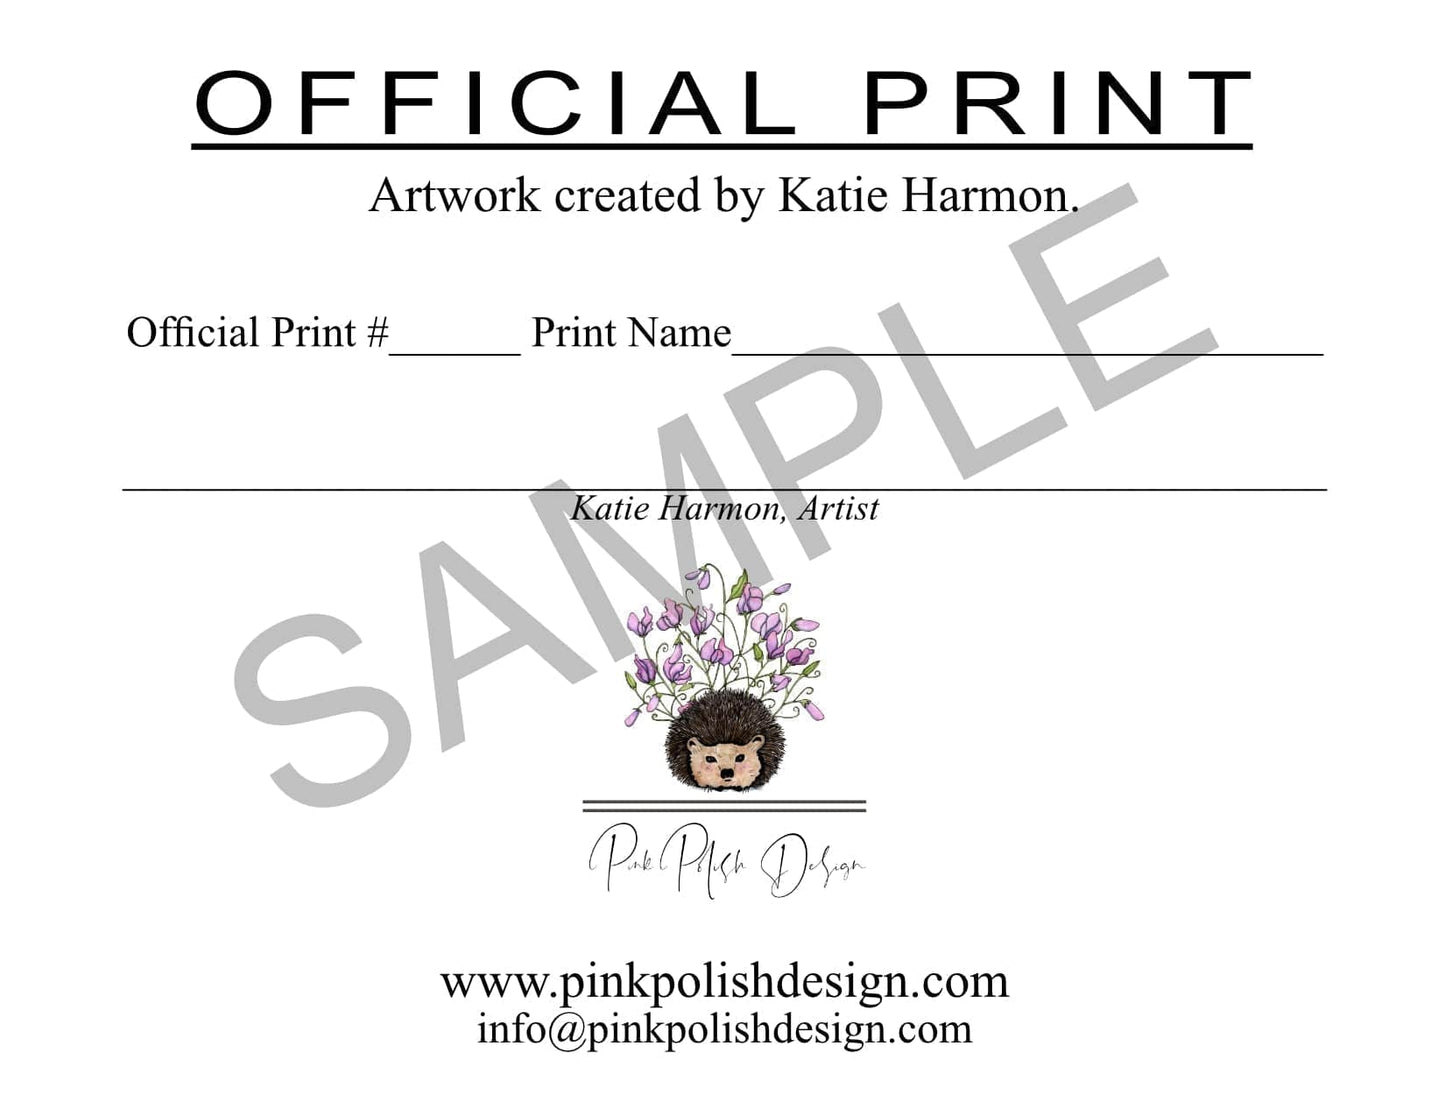 PinkPolish Design Art Prints "Not Only a Mouse" Watercolor Painting: Art Print